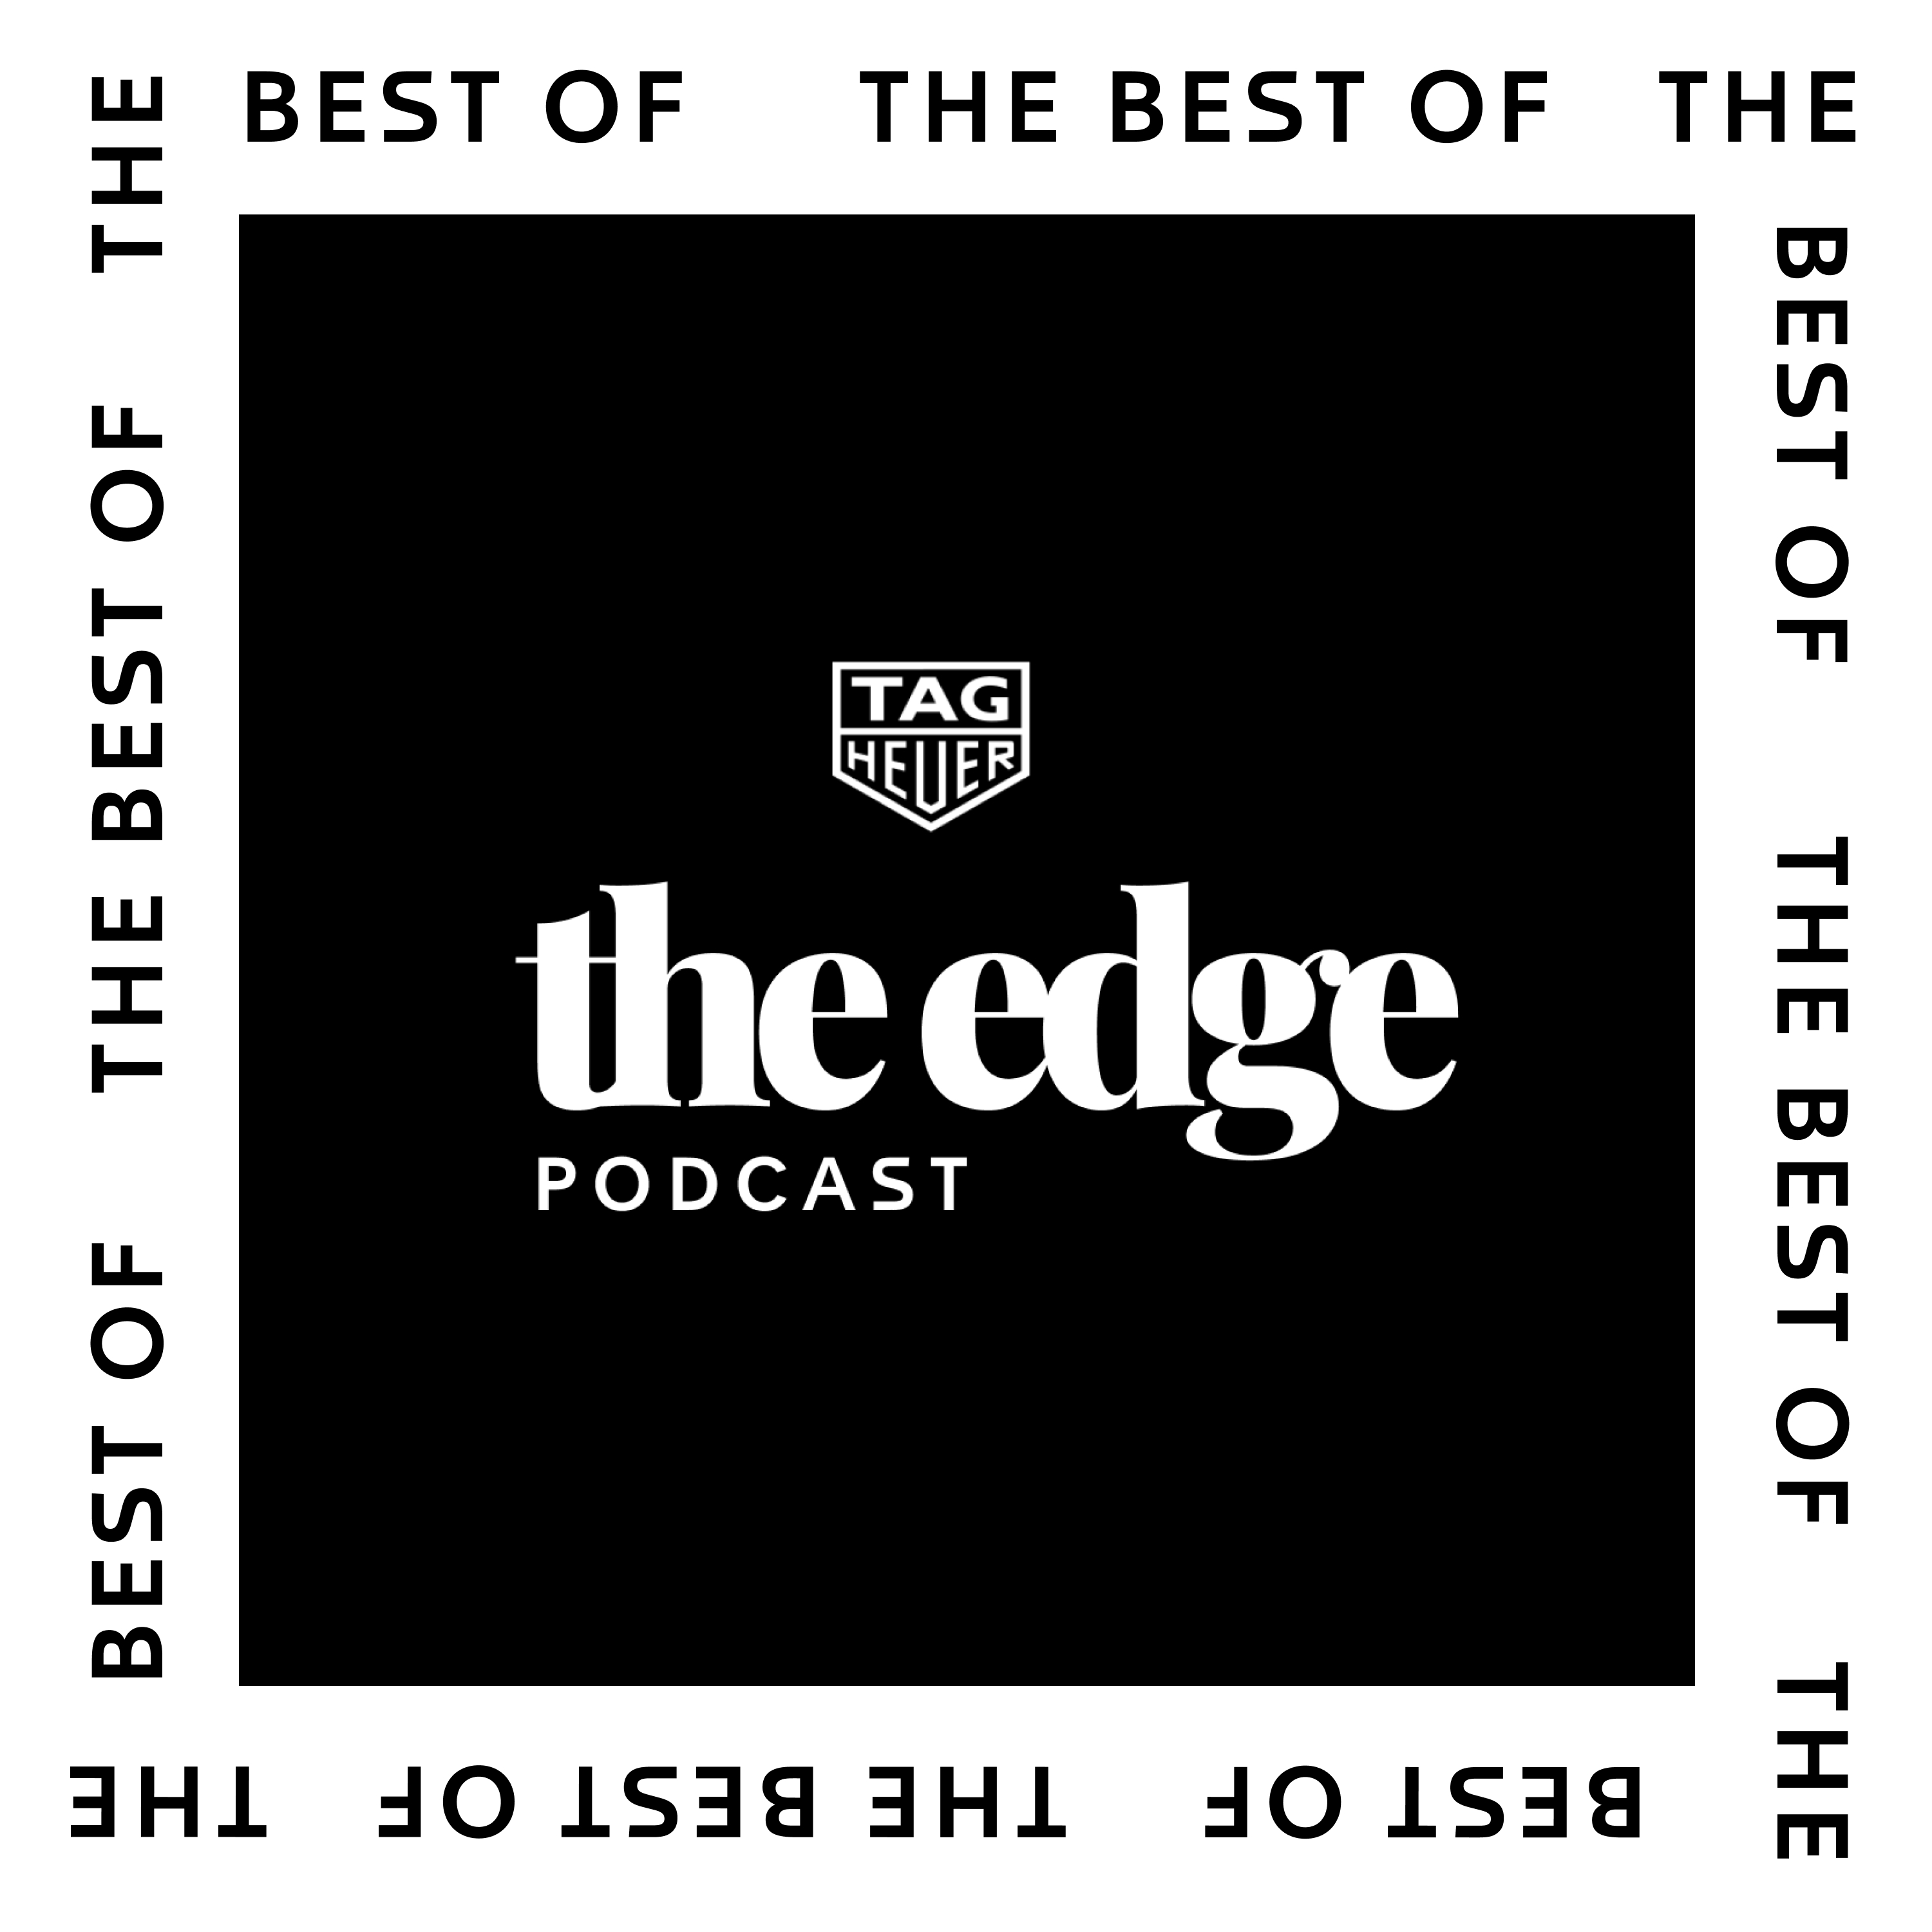 #12 : The best of